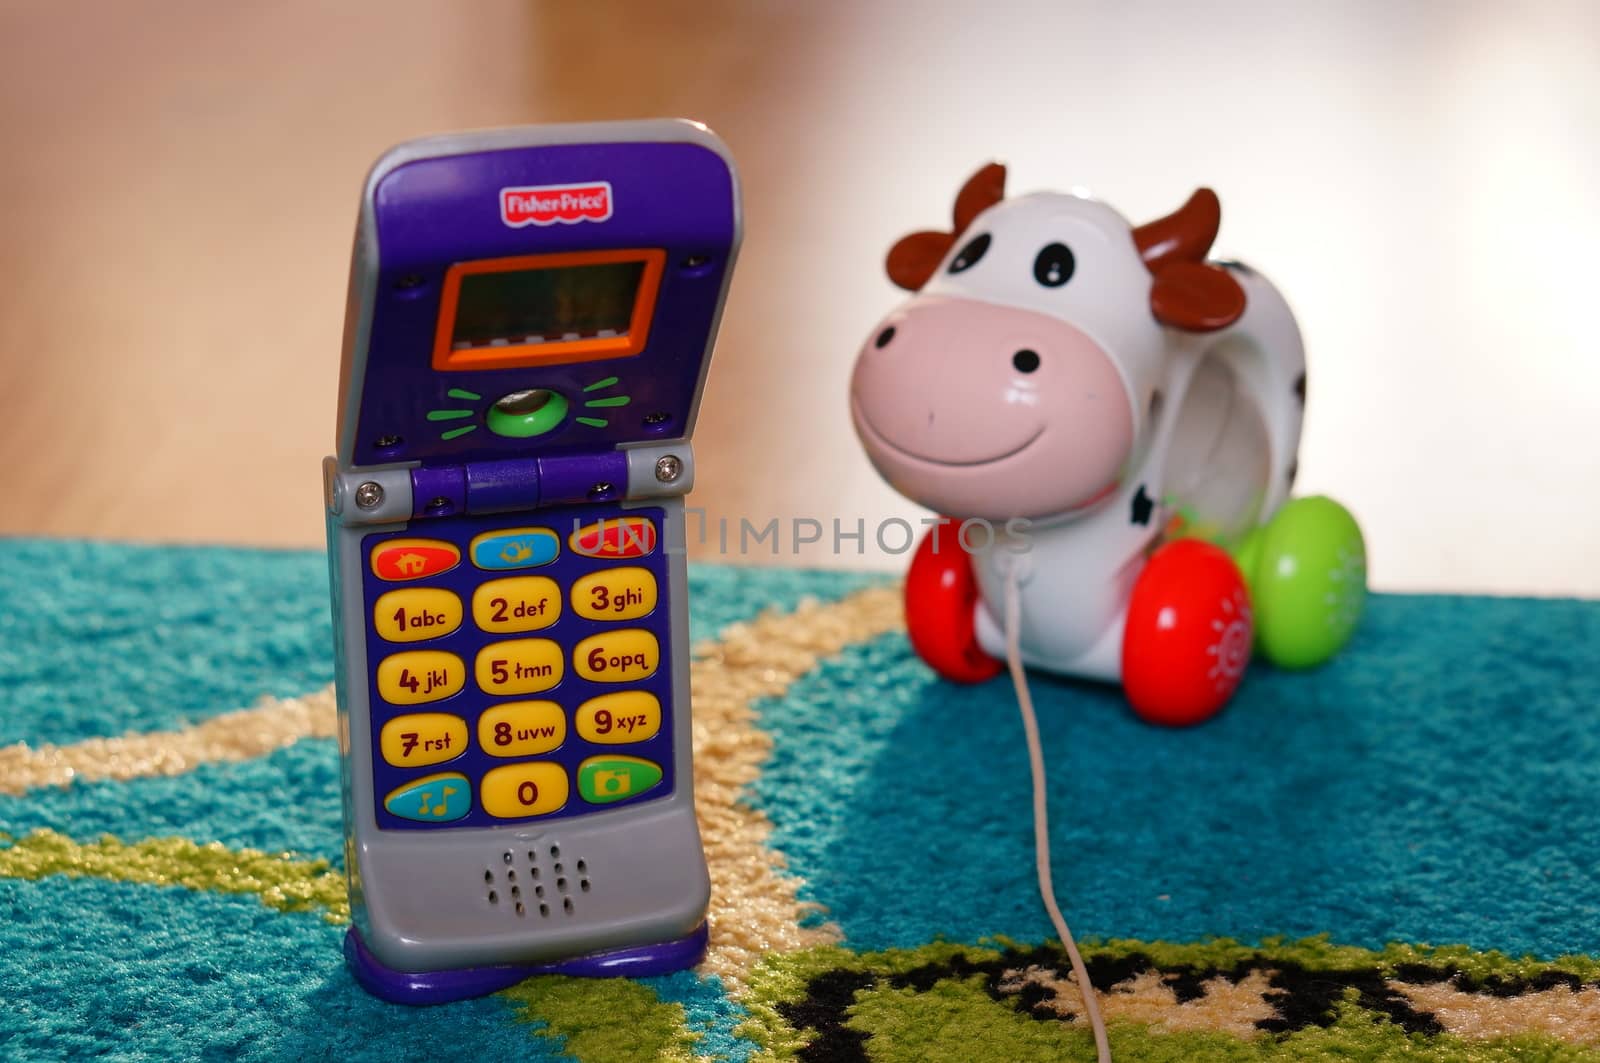 POZNAN, POLAND - AUGUST 20, 2015: Fisher Price plastic toy phone and toy cow in background